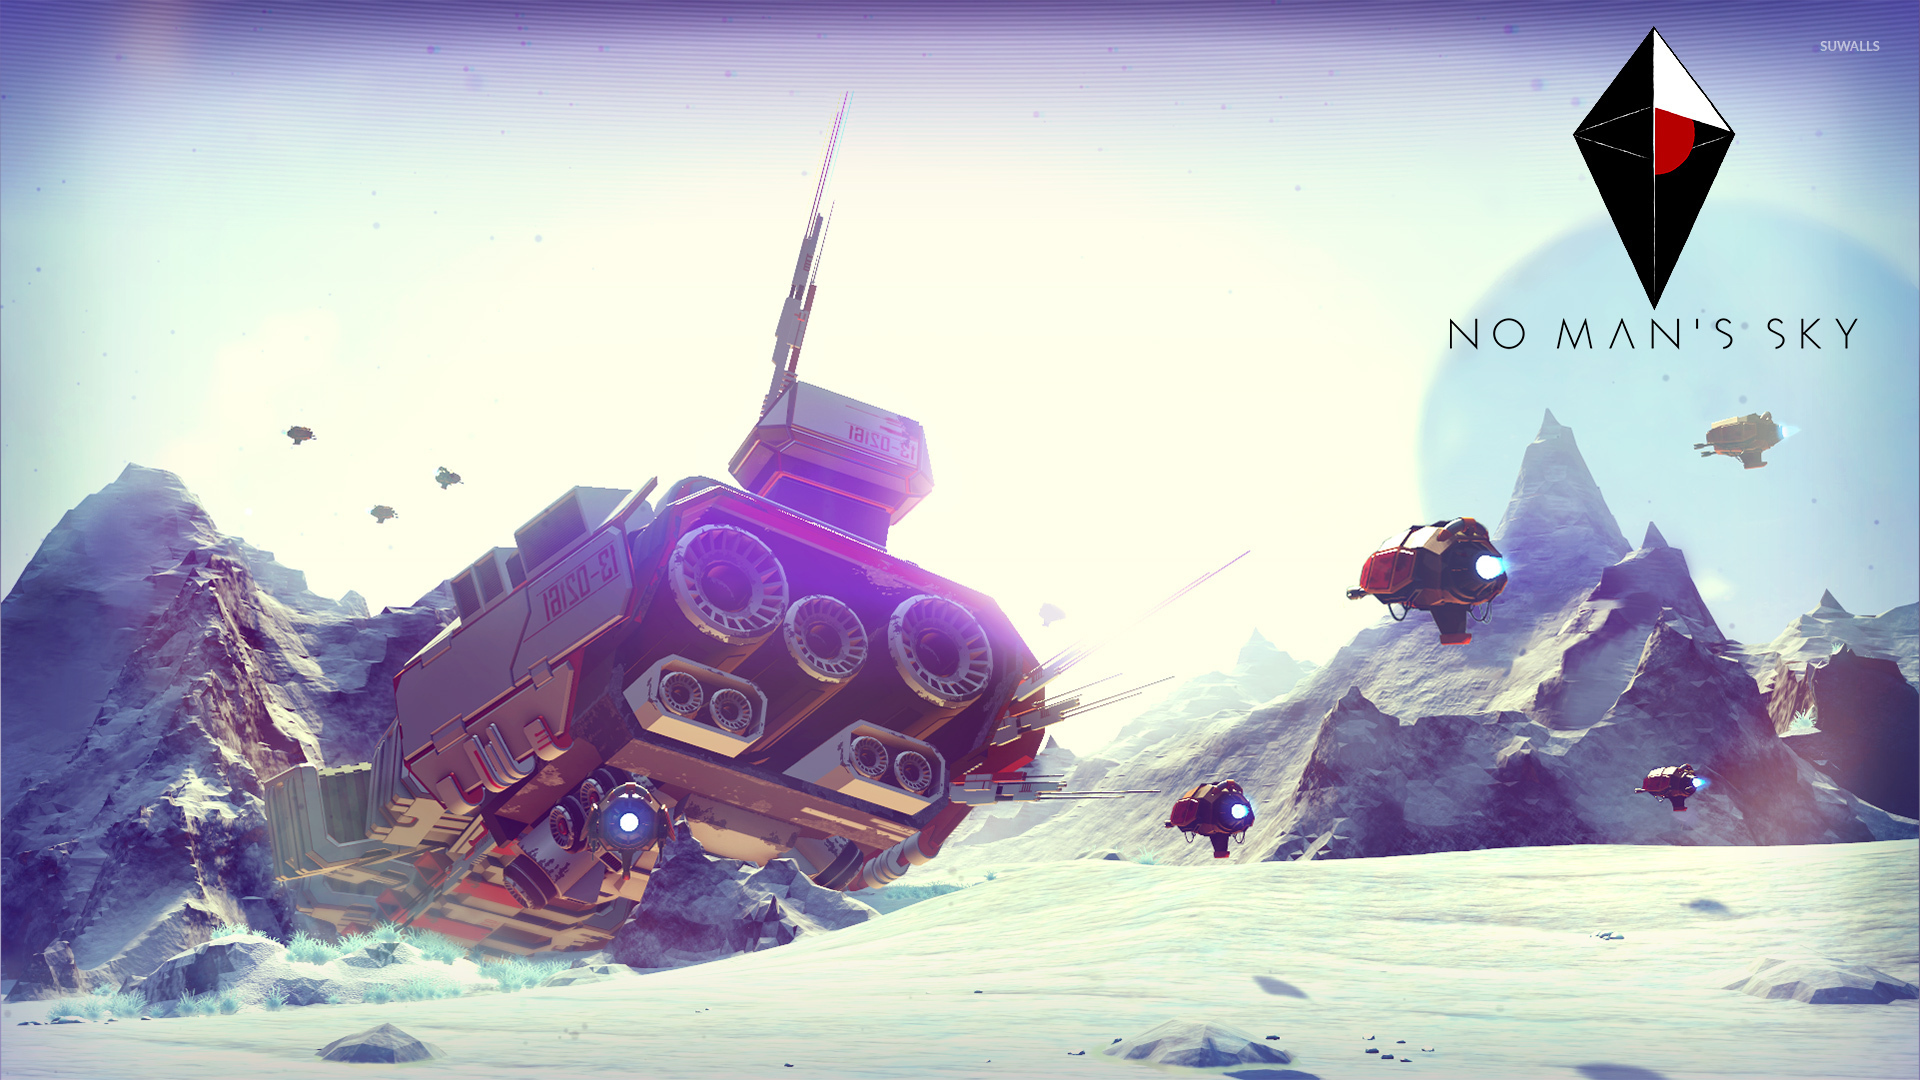 Crashed spaceship in No Man's Sky wallpaper - Game wallpapers - #52704